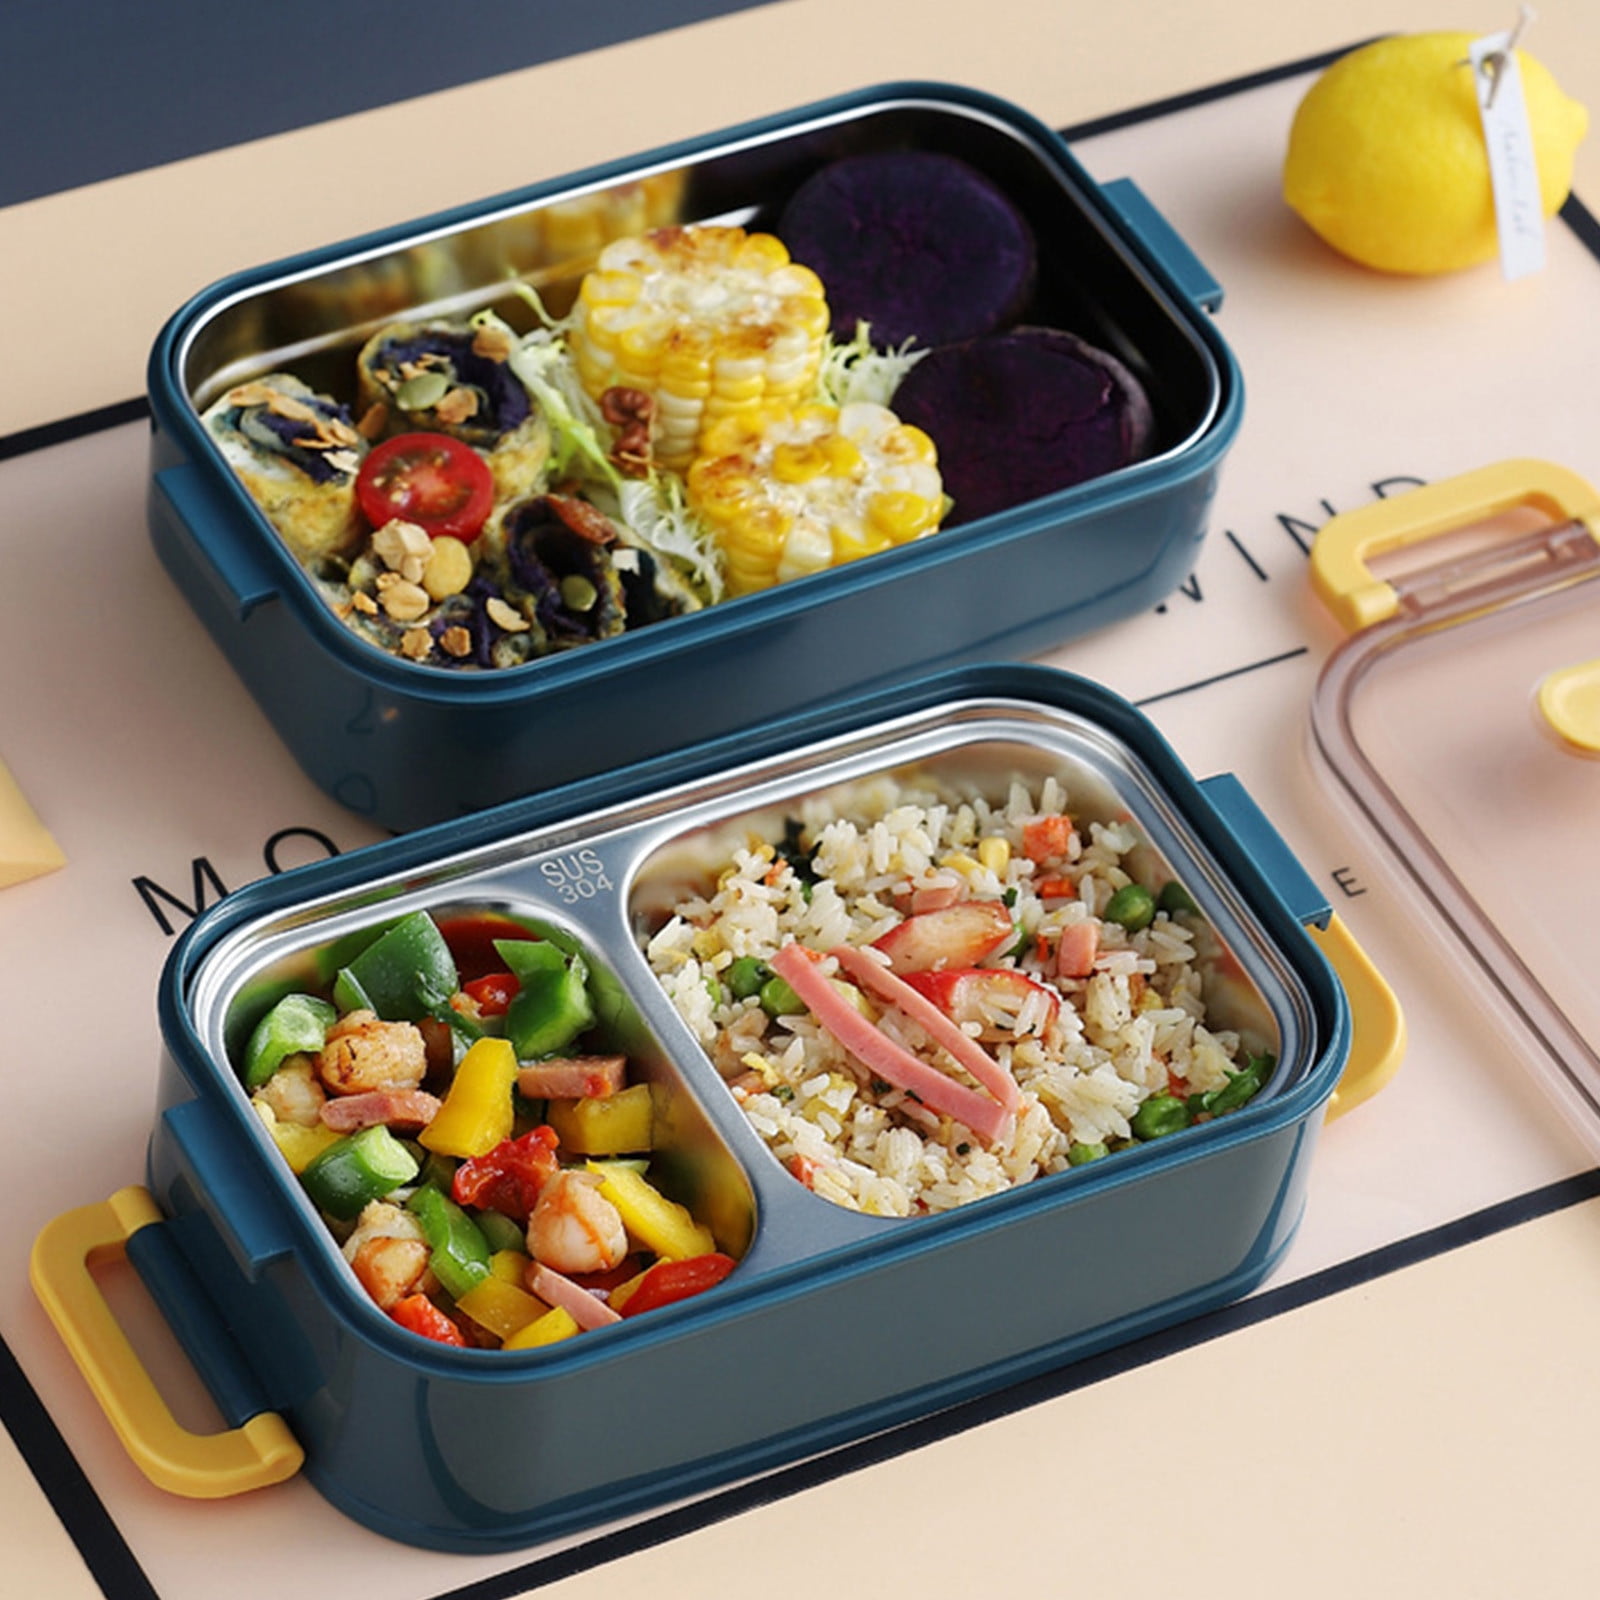 Xmmswdla 4 Compartment Silicone Bento Box Lunch Container for Kids and Adults - Microwave, Reusable,Dishwasher and Freezer Safe - Perfect for Work